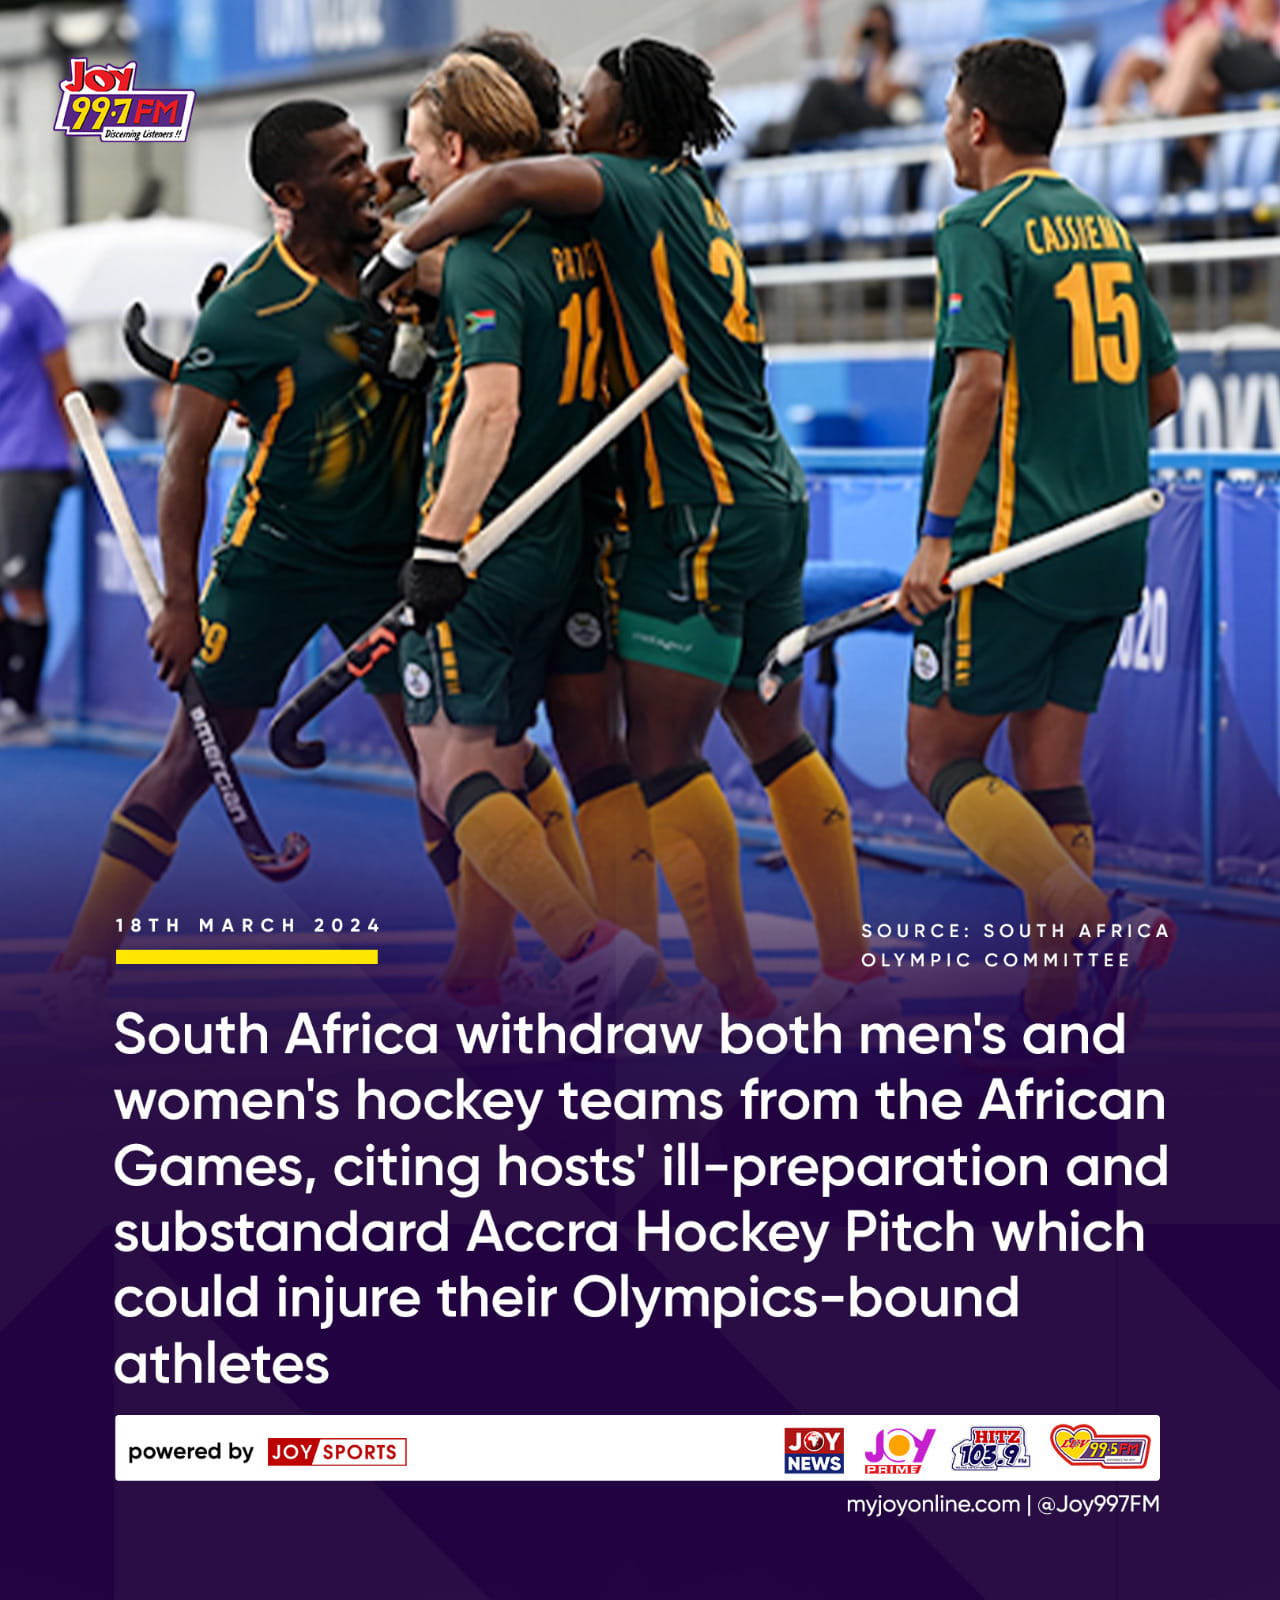 Shameful: South Africa withdraws its Men and Women’s Hockey teams from the 13th African Games